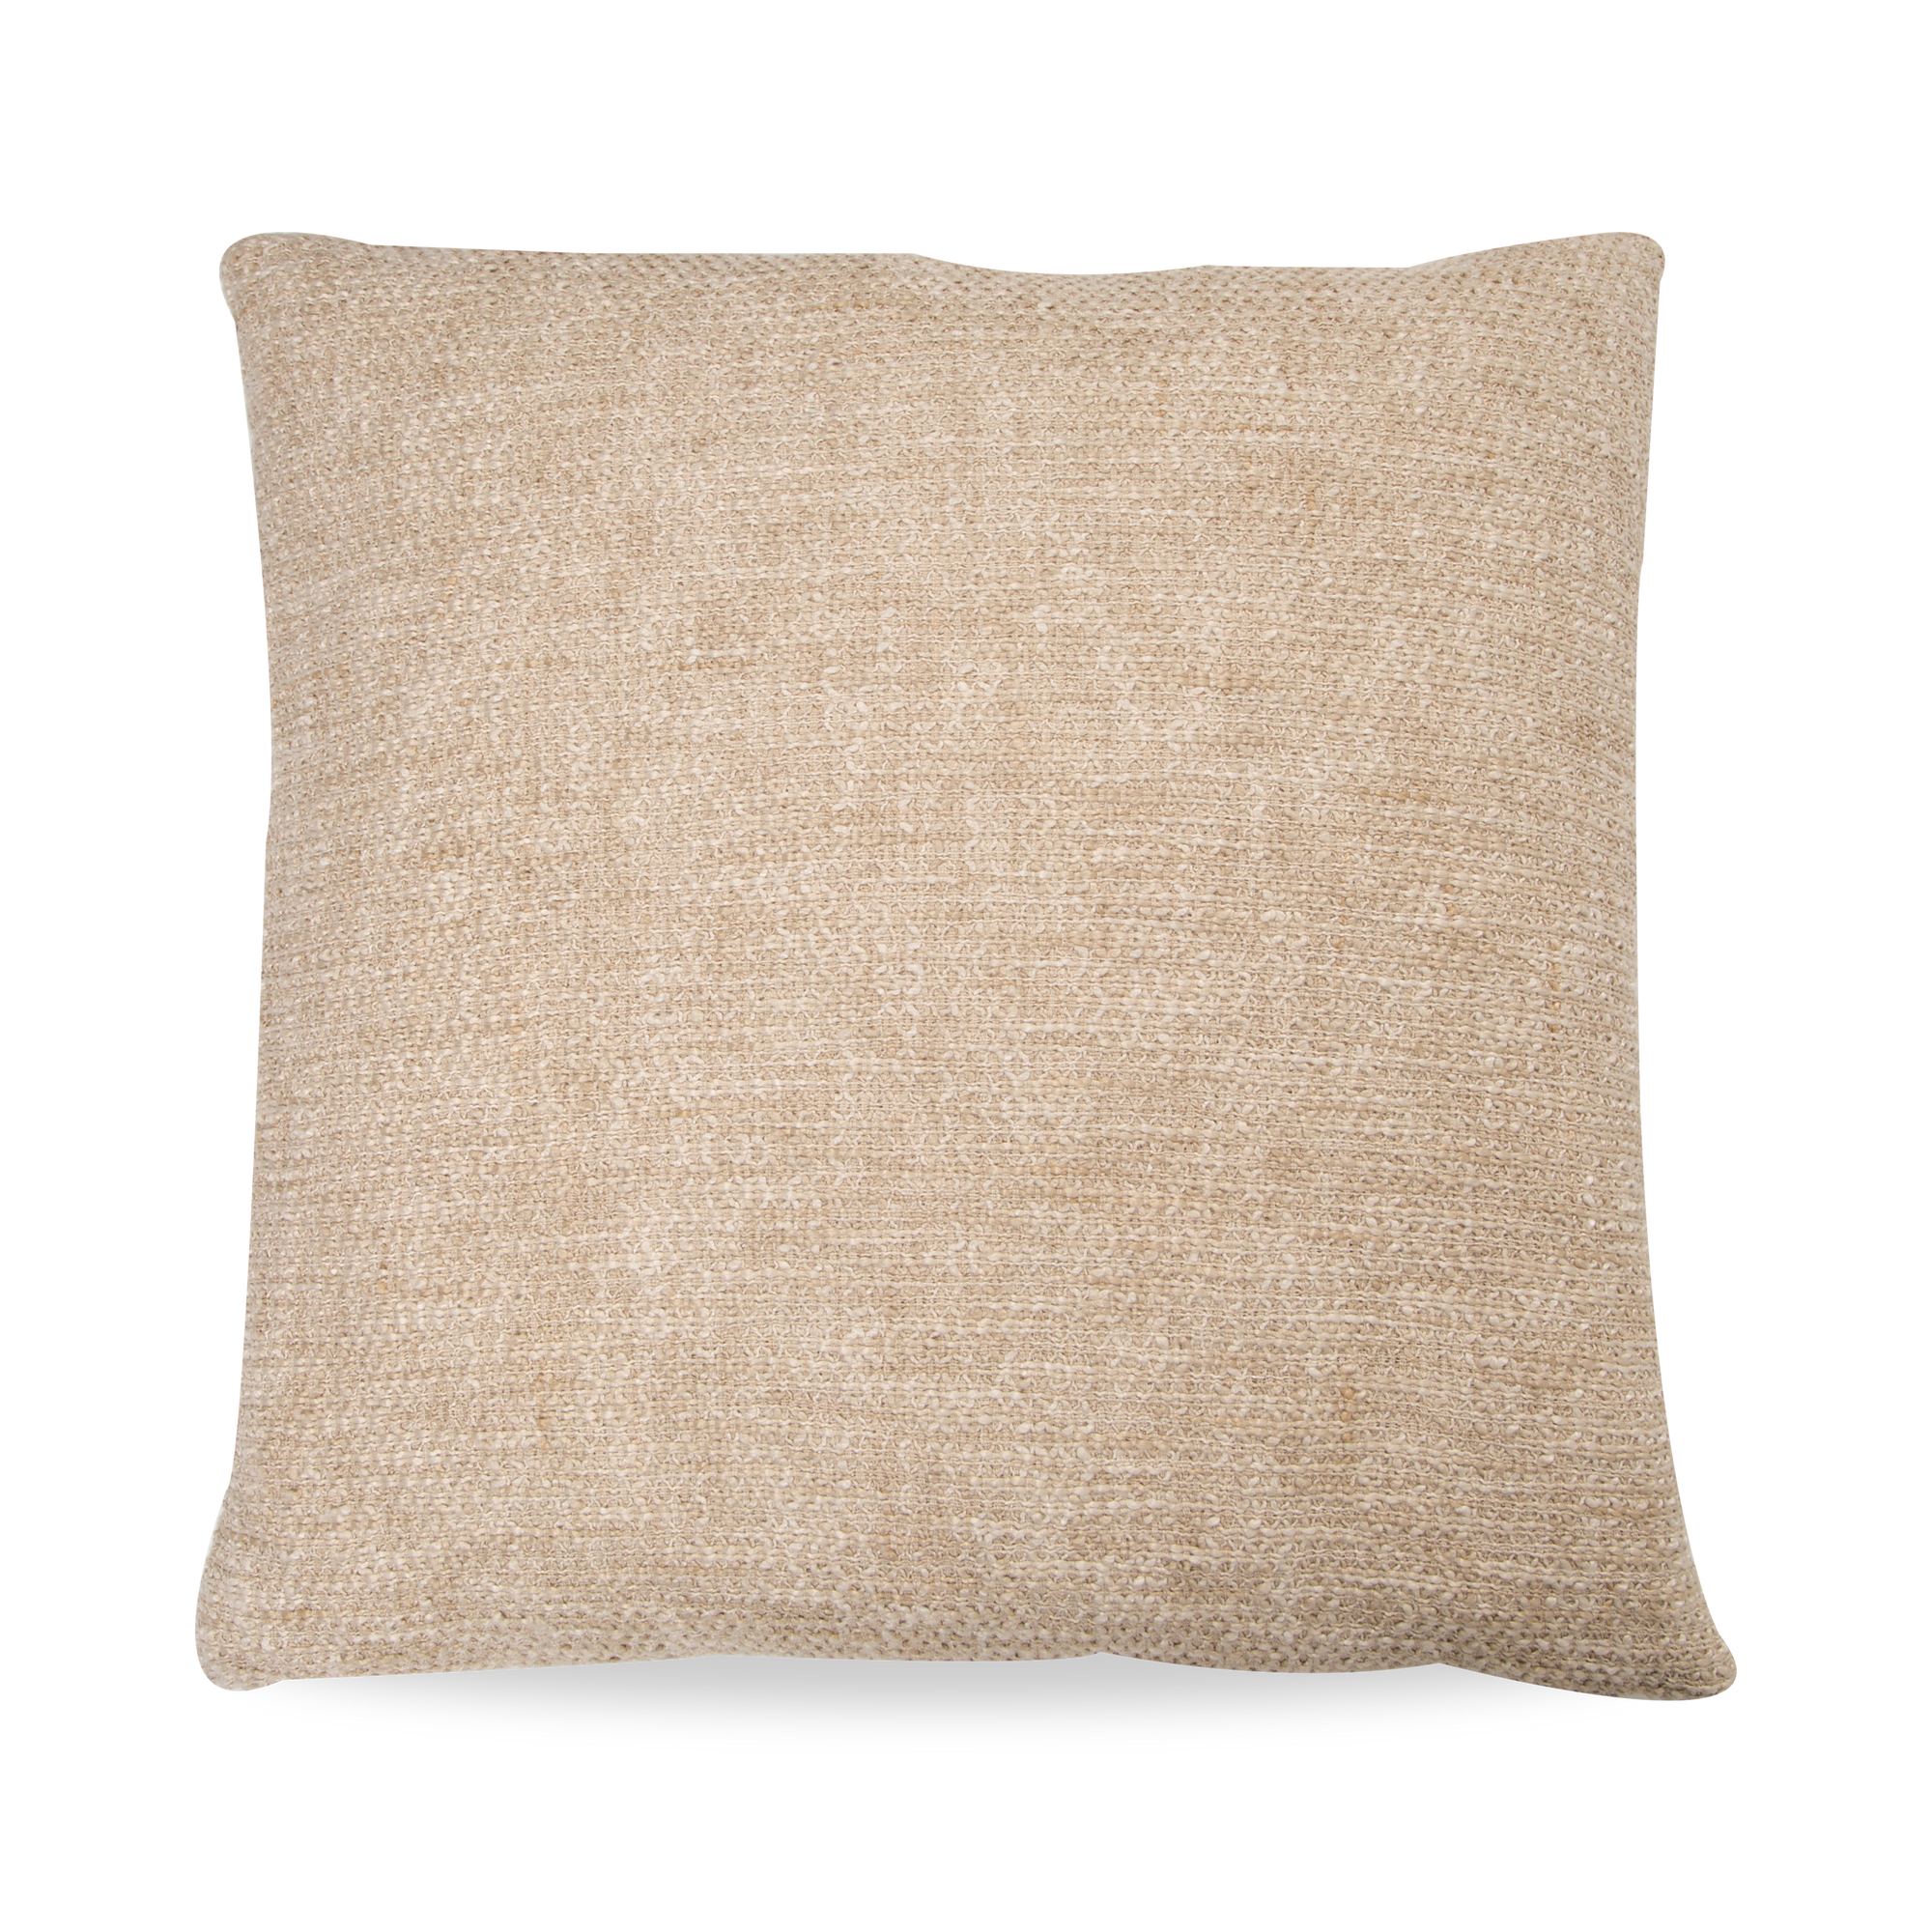 Showcasing a beautiful unique face, the Textured Pillow focuses on textural and simplicity to elevate your space.